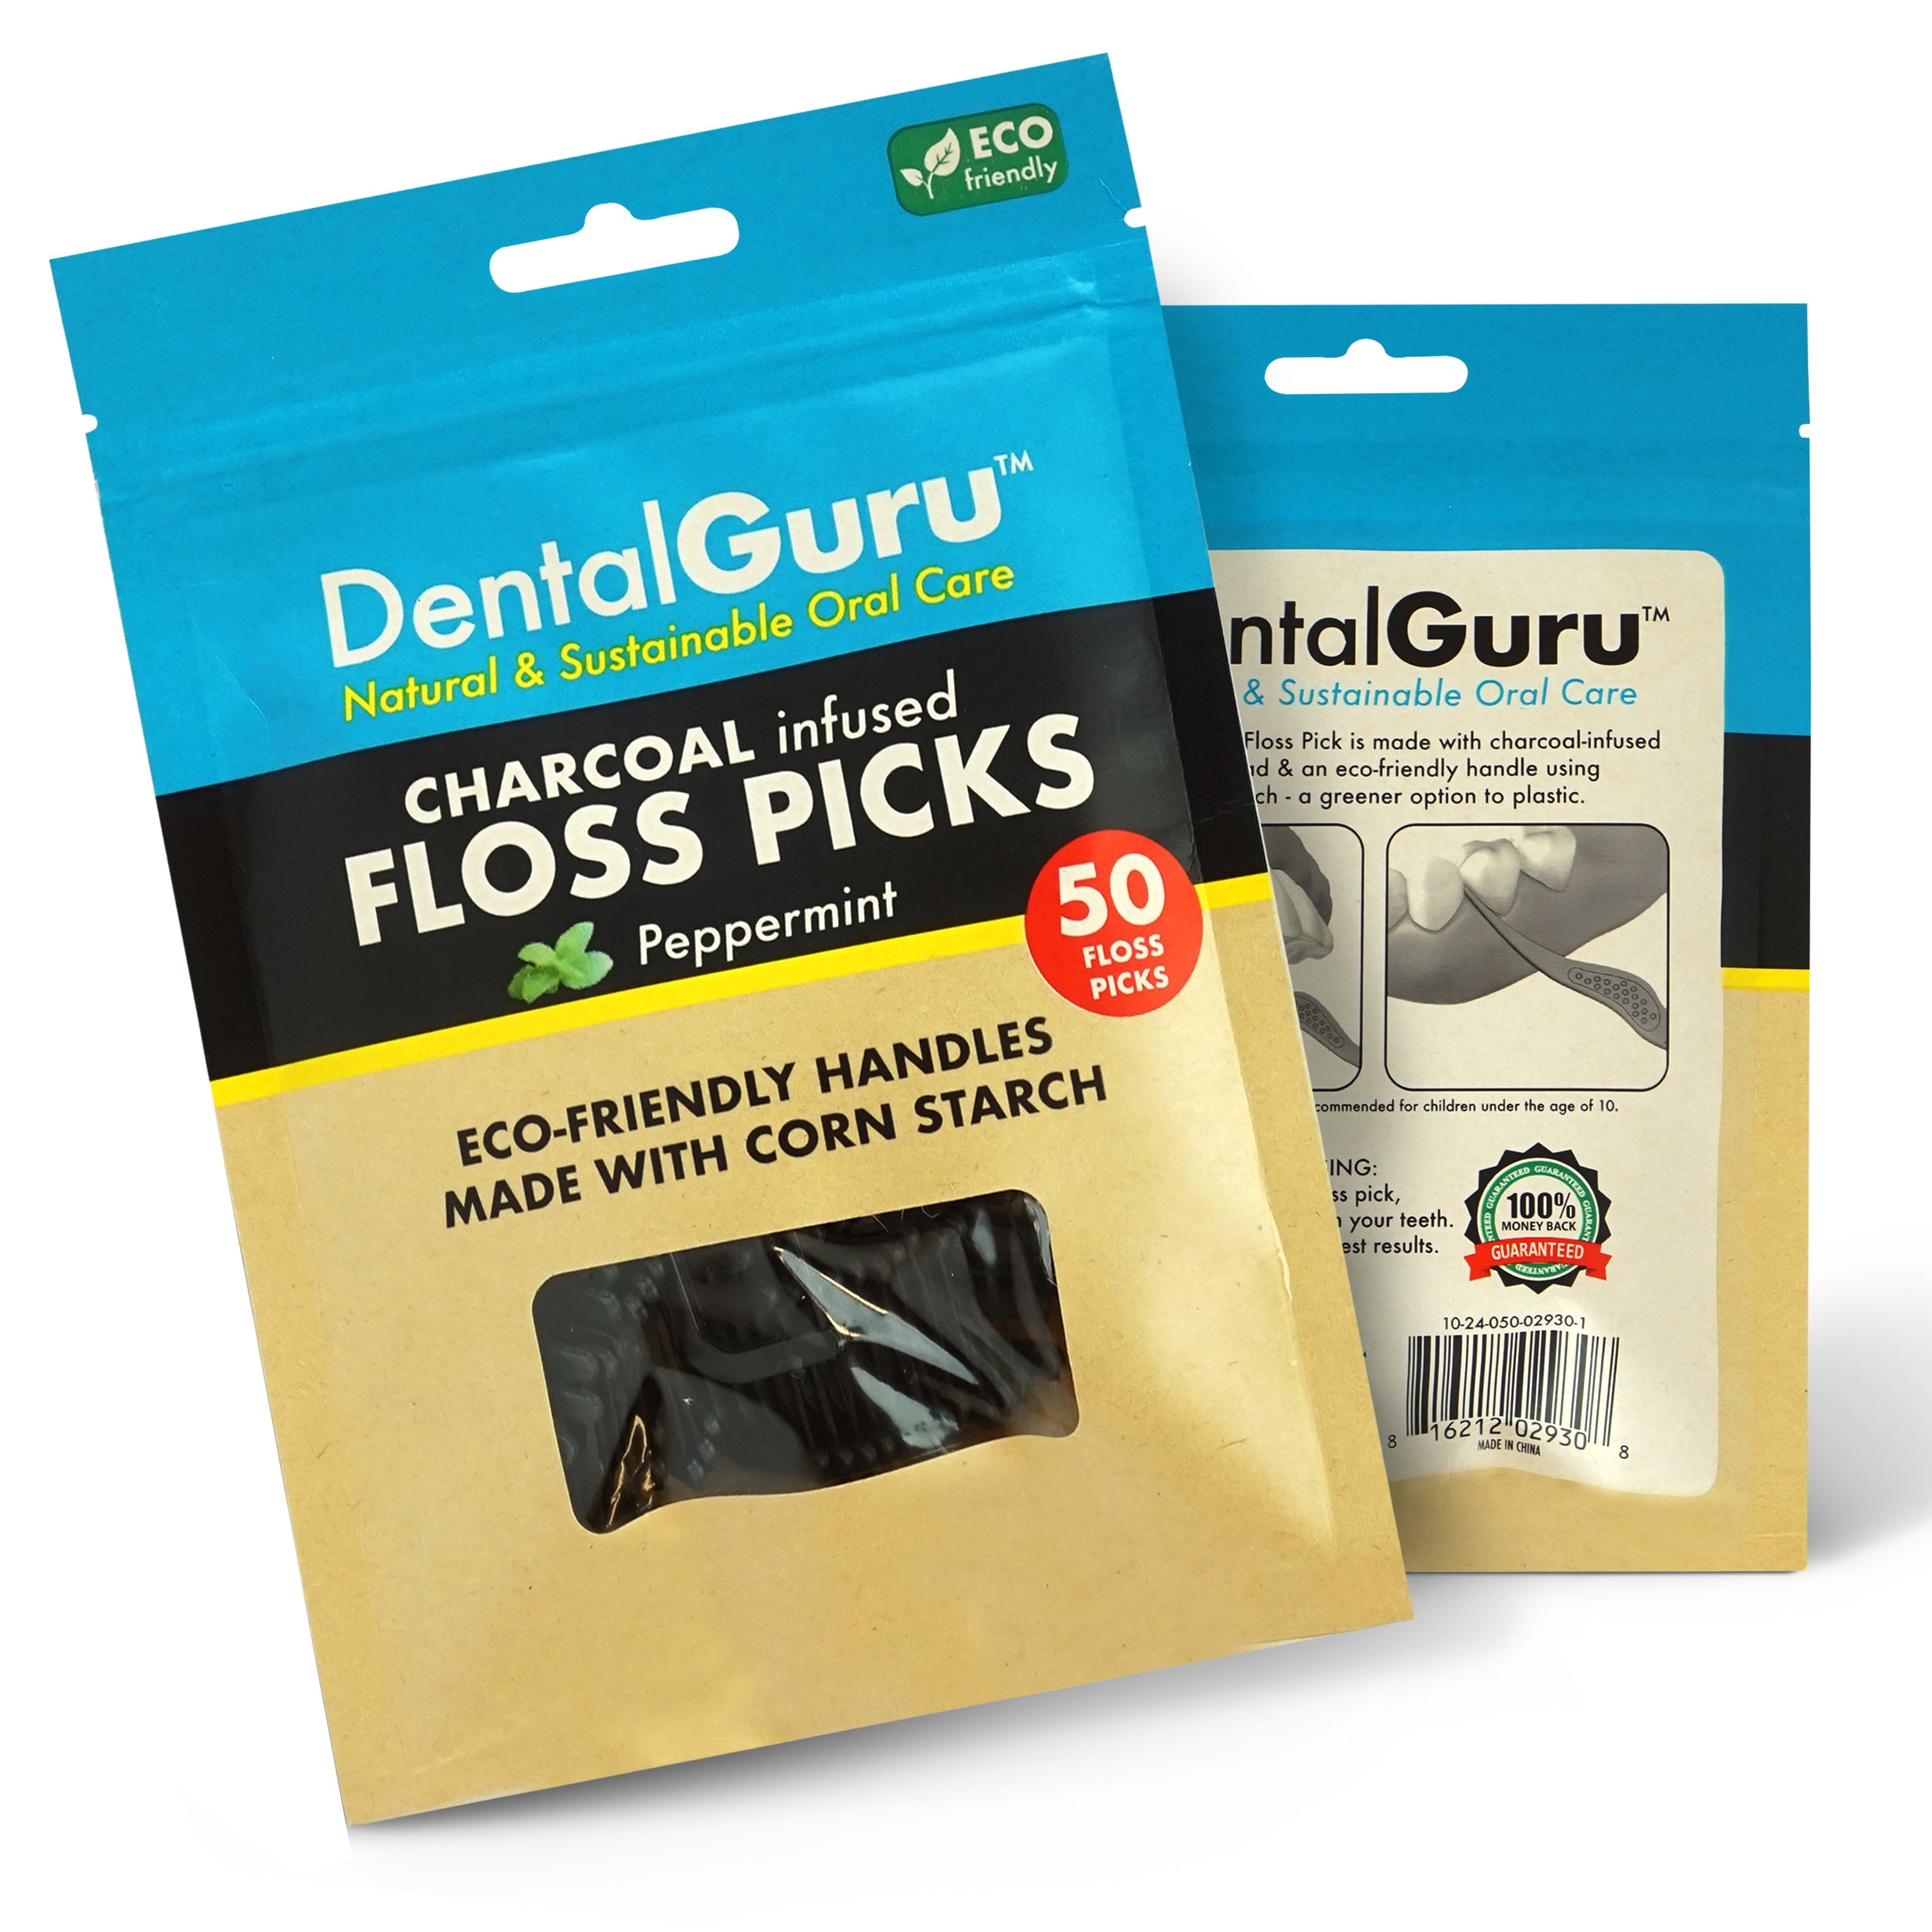 Charcoal Floss Picks (pack of 18)- Wholesale Only, Contact to Purchase